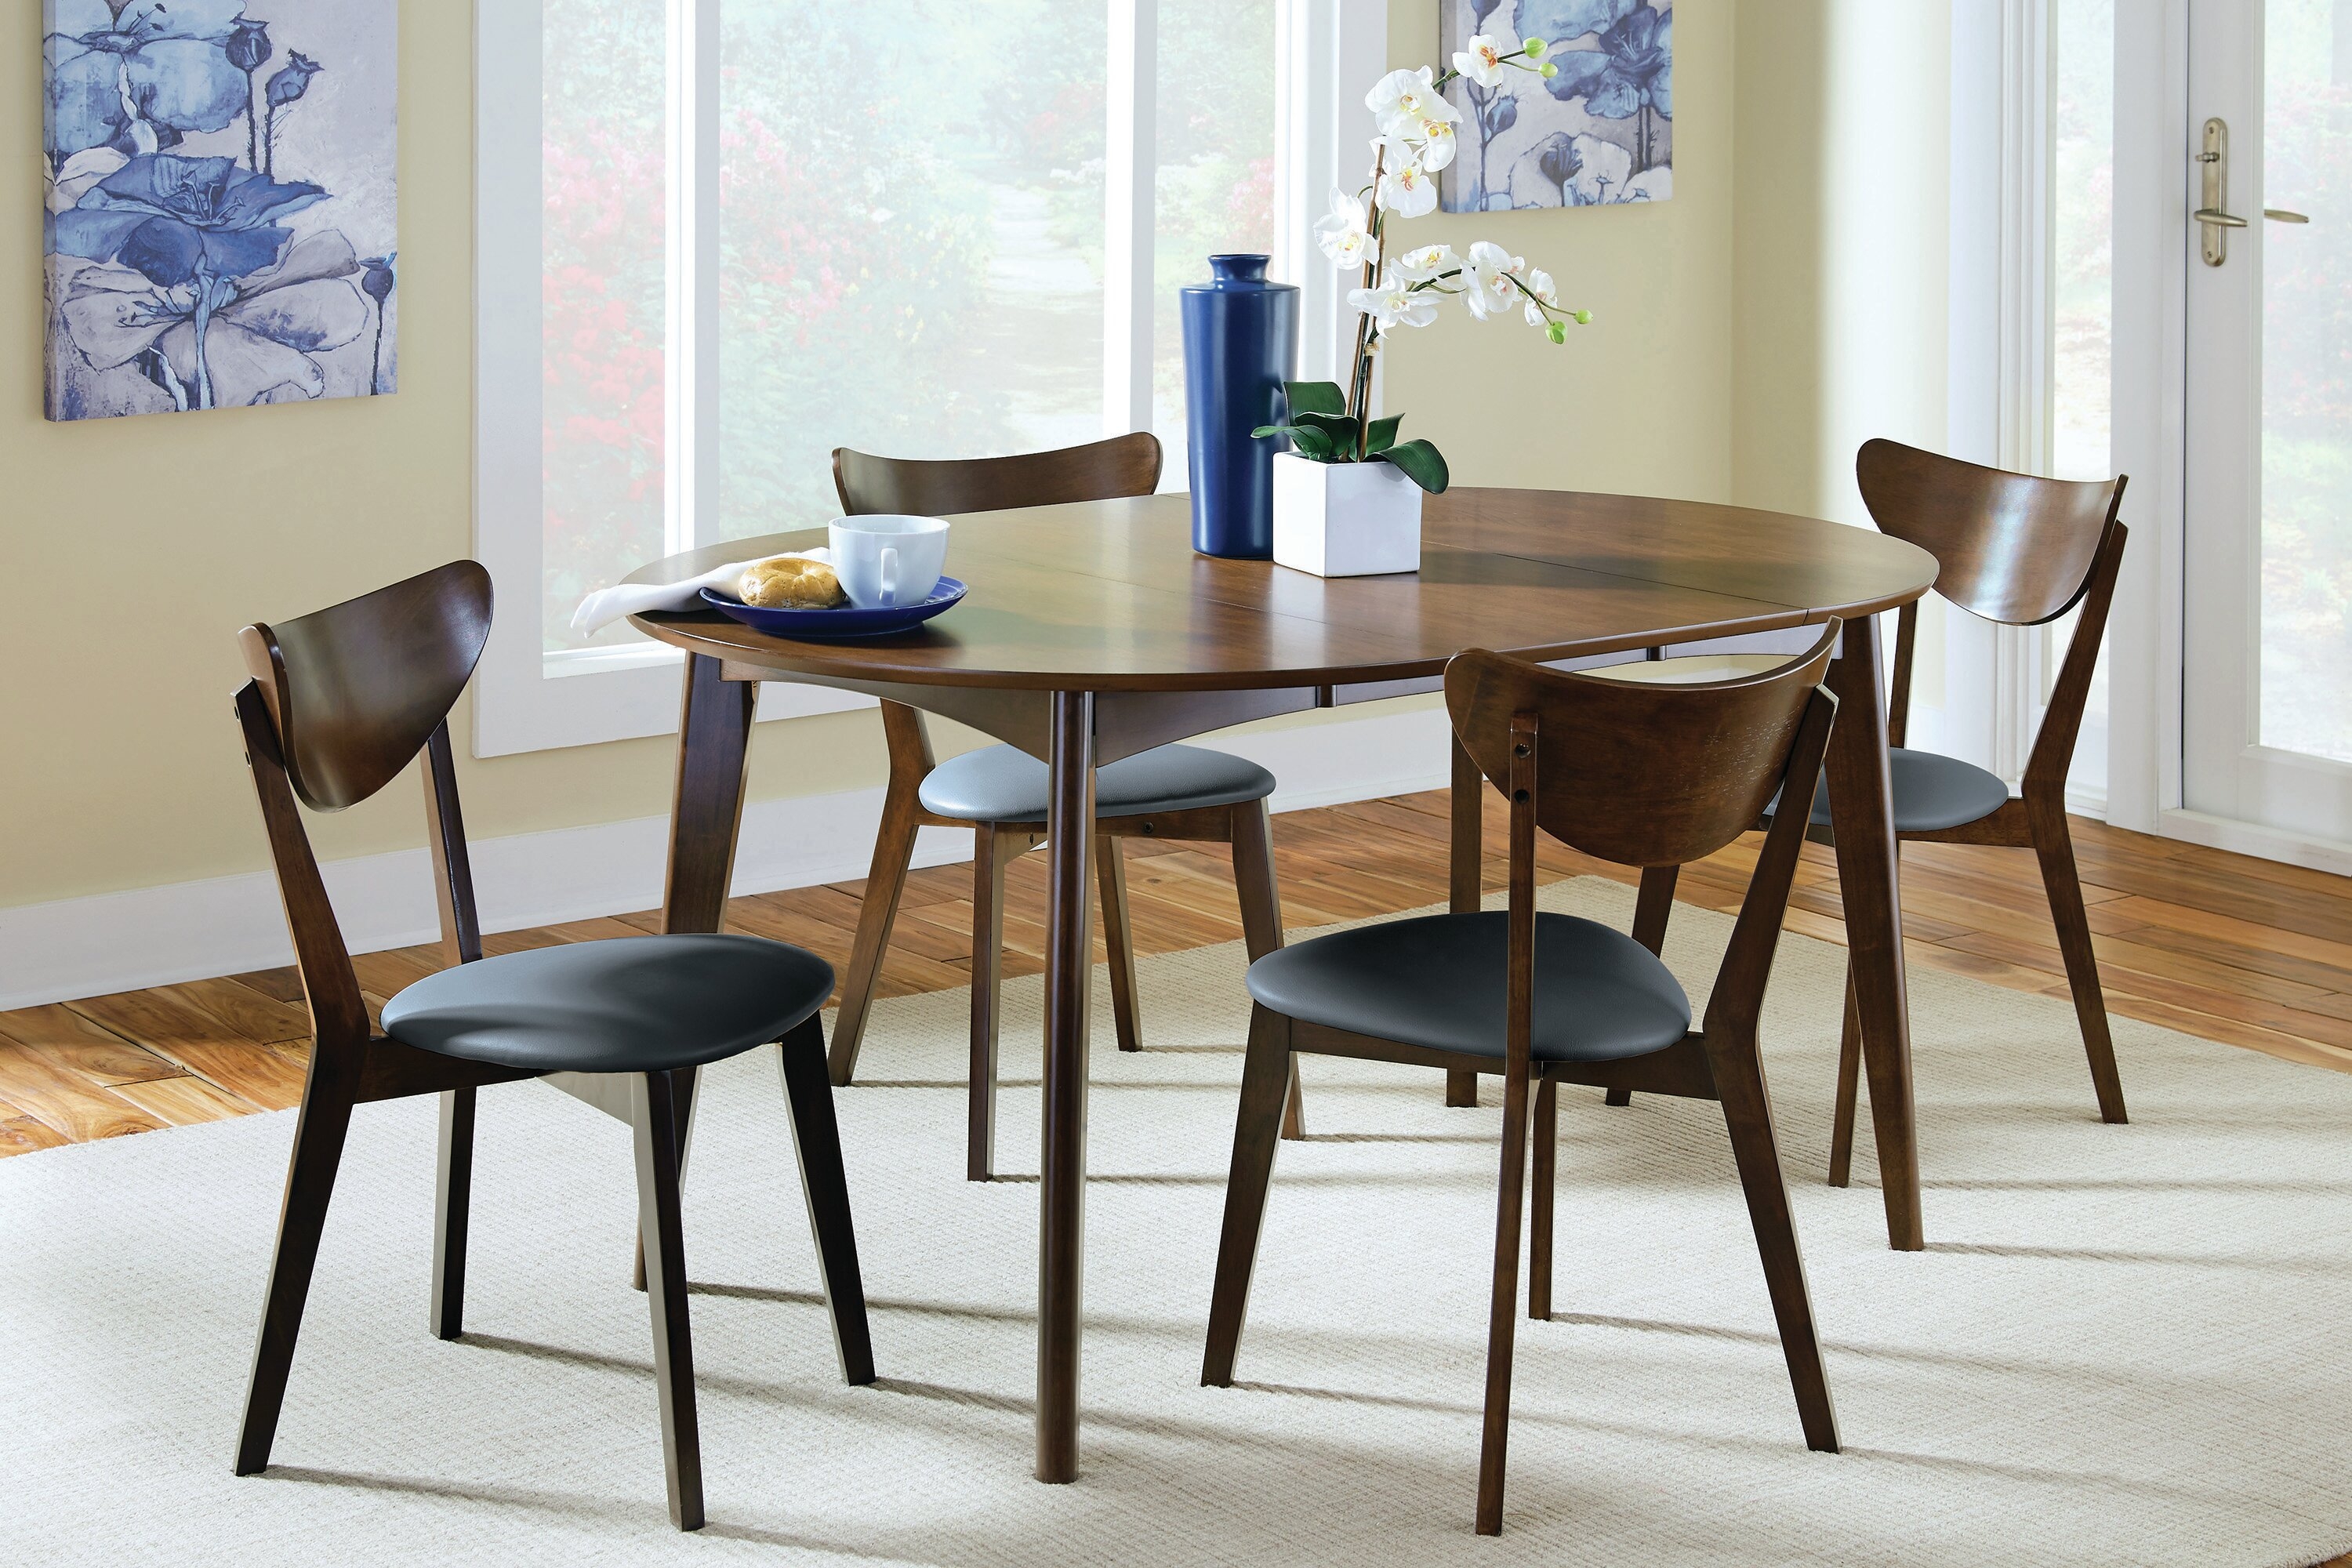 Lootens Dining Table - Image 1